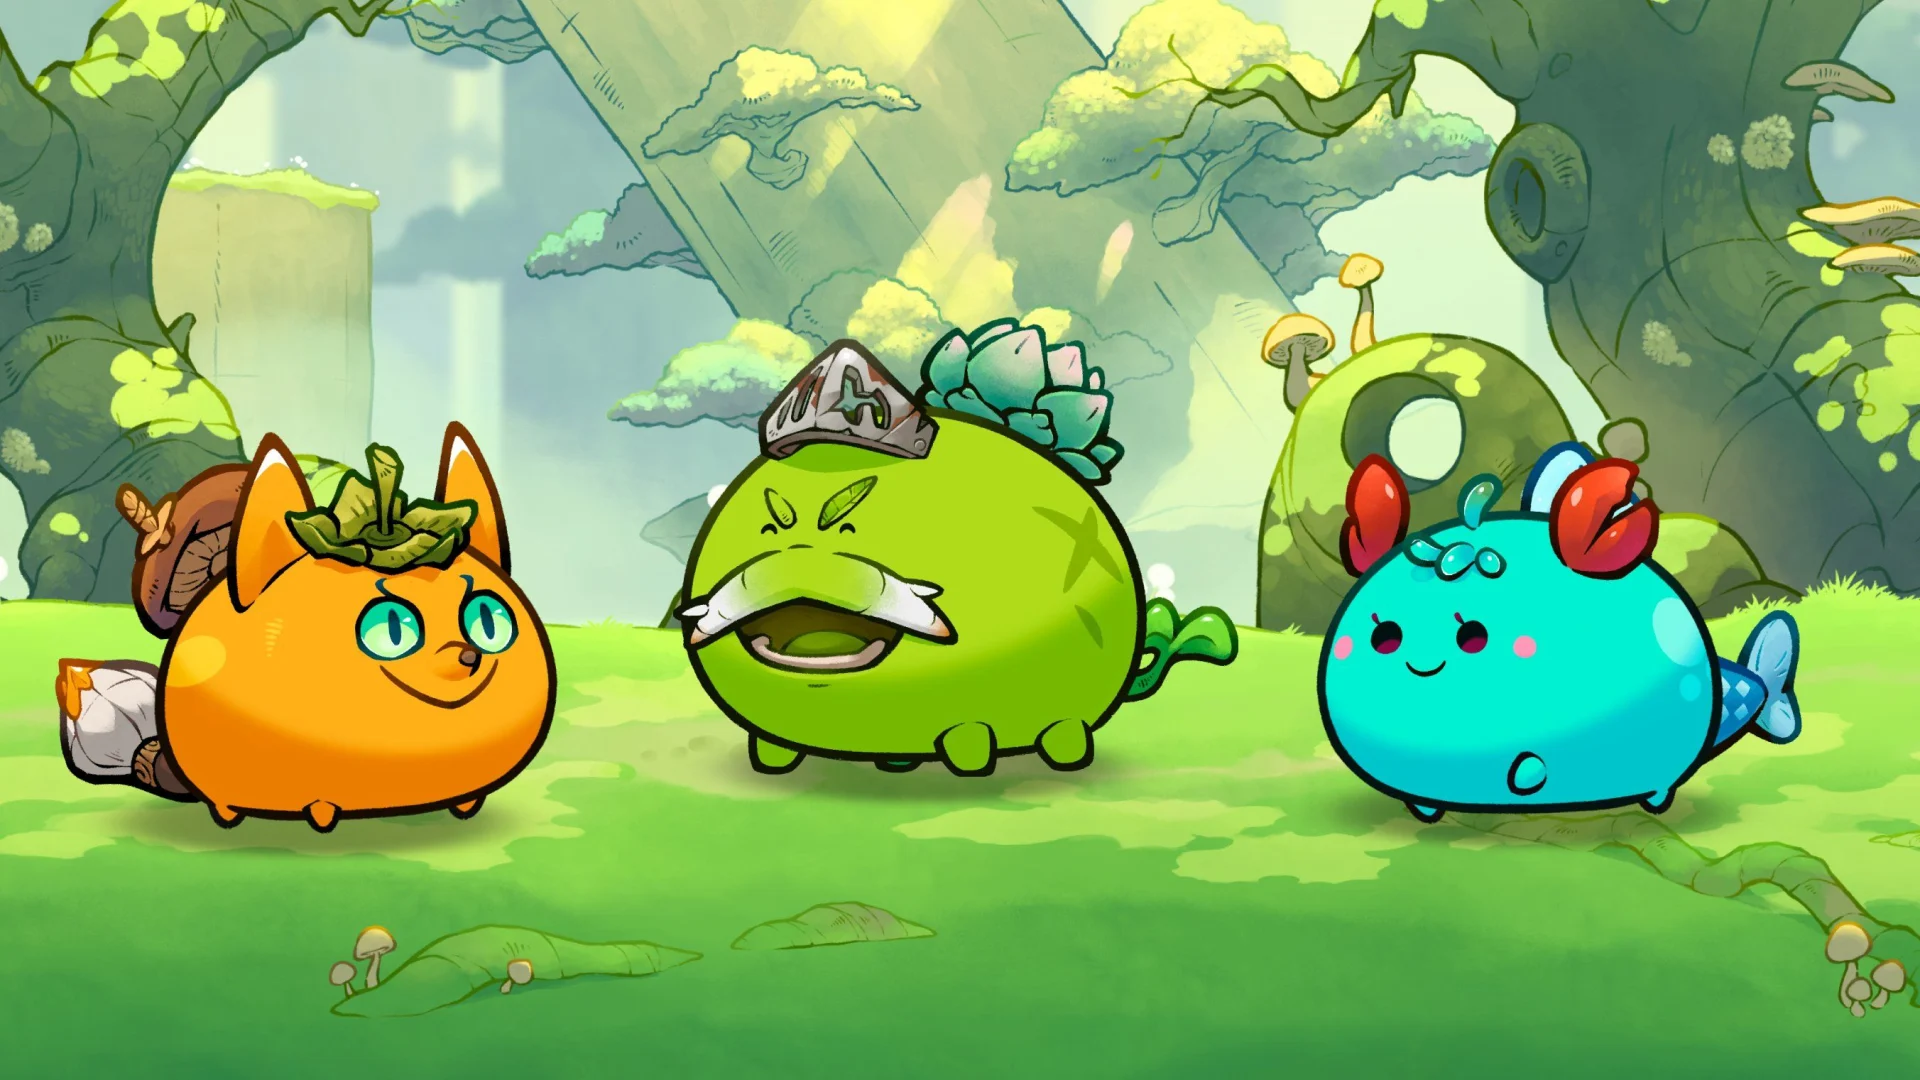 Team of three Axie Infinity creatures: orange, green, and turquoise